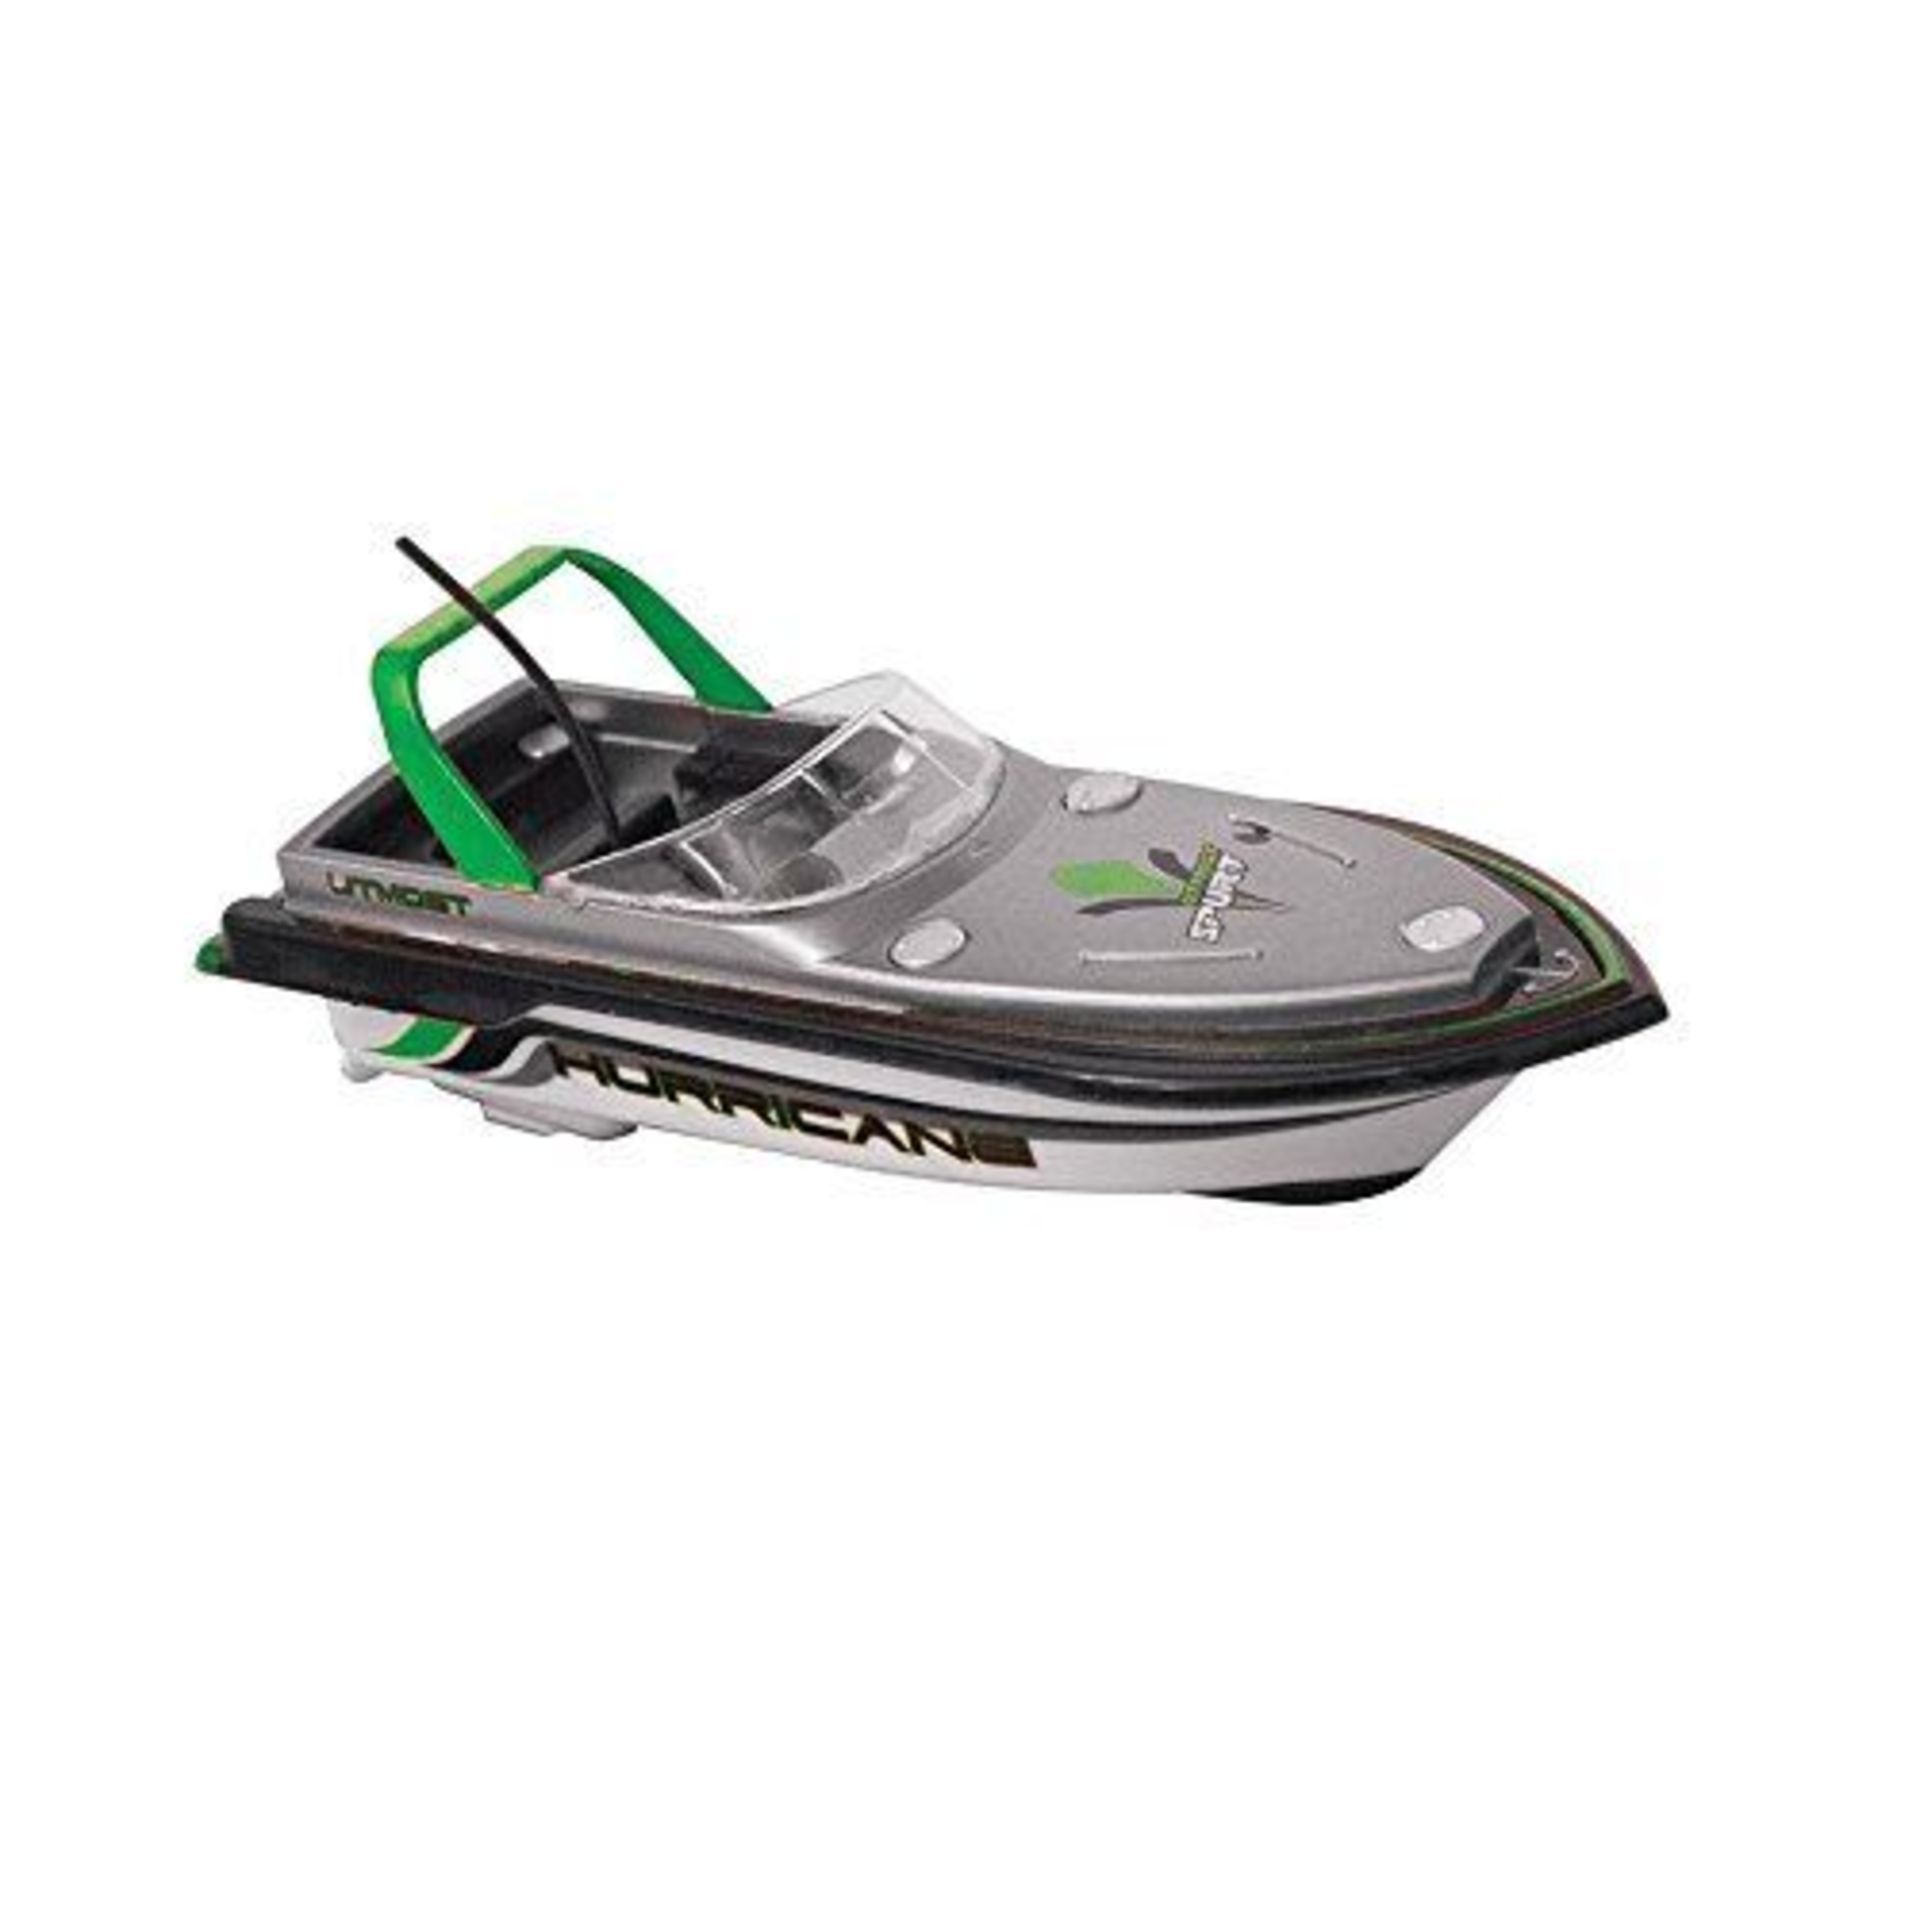 V Brand New Radio Controlled Sport Series Mini Boat Colour May Vary ISP £20-98 (Ebay)